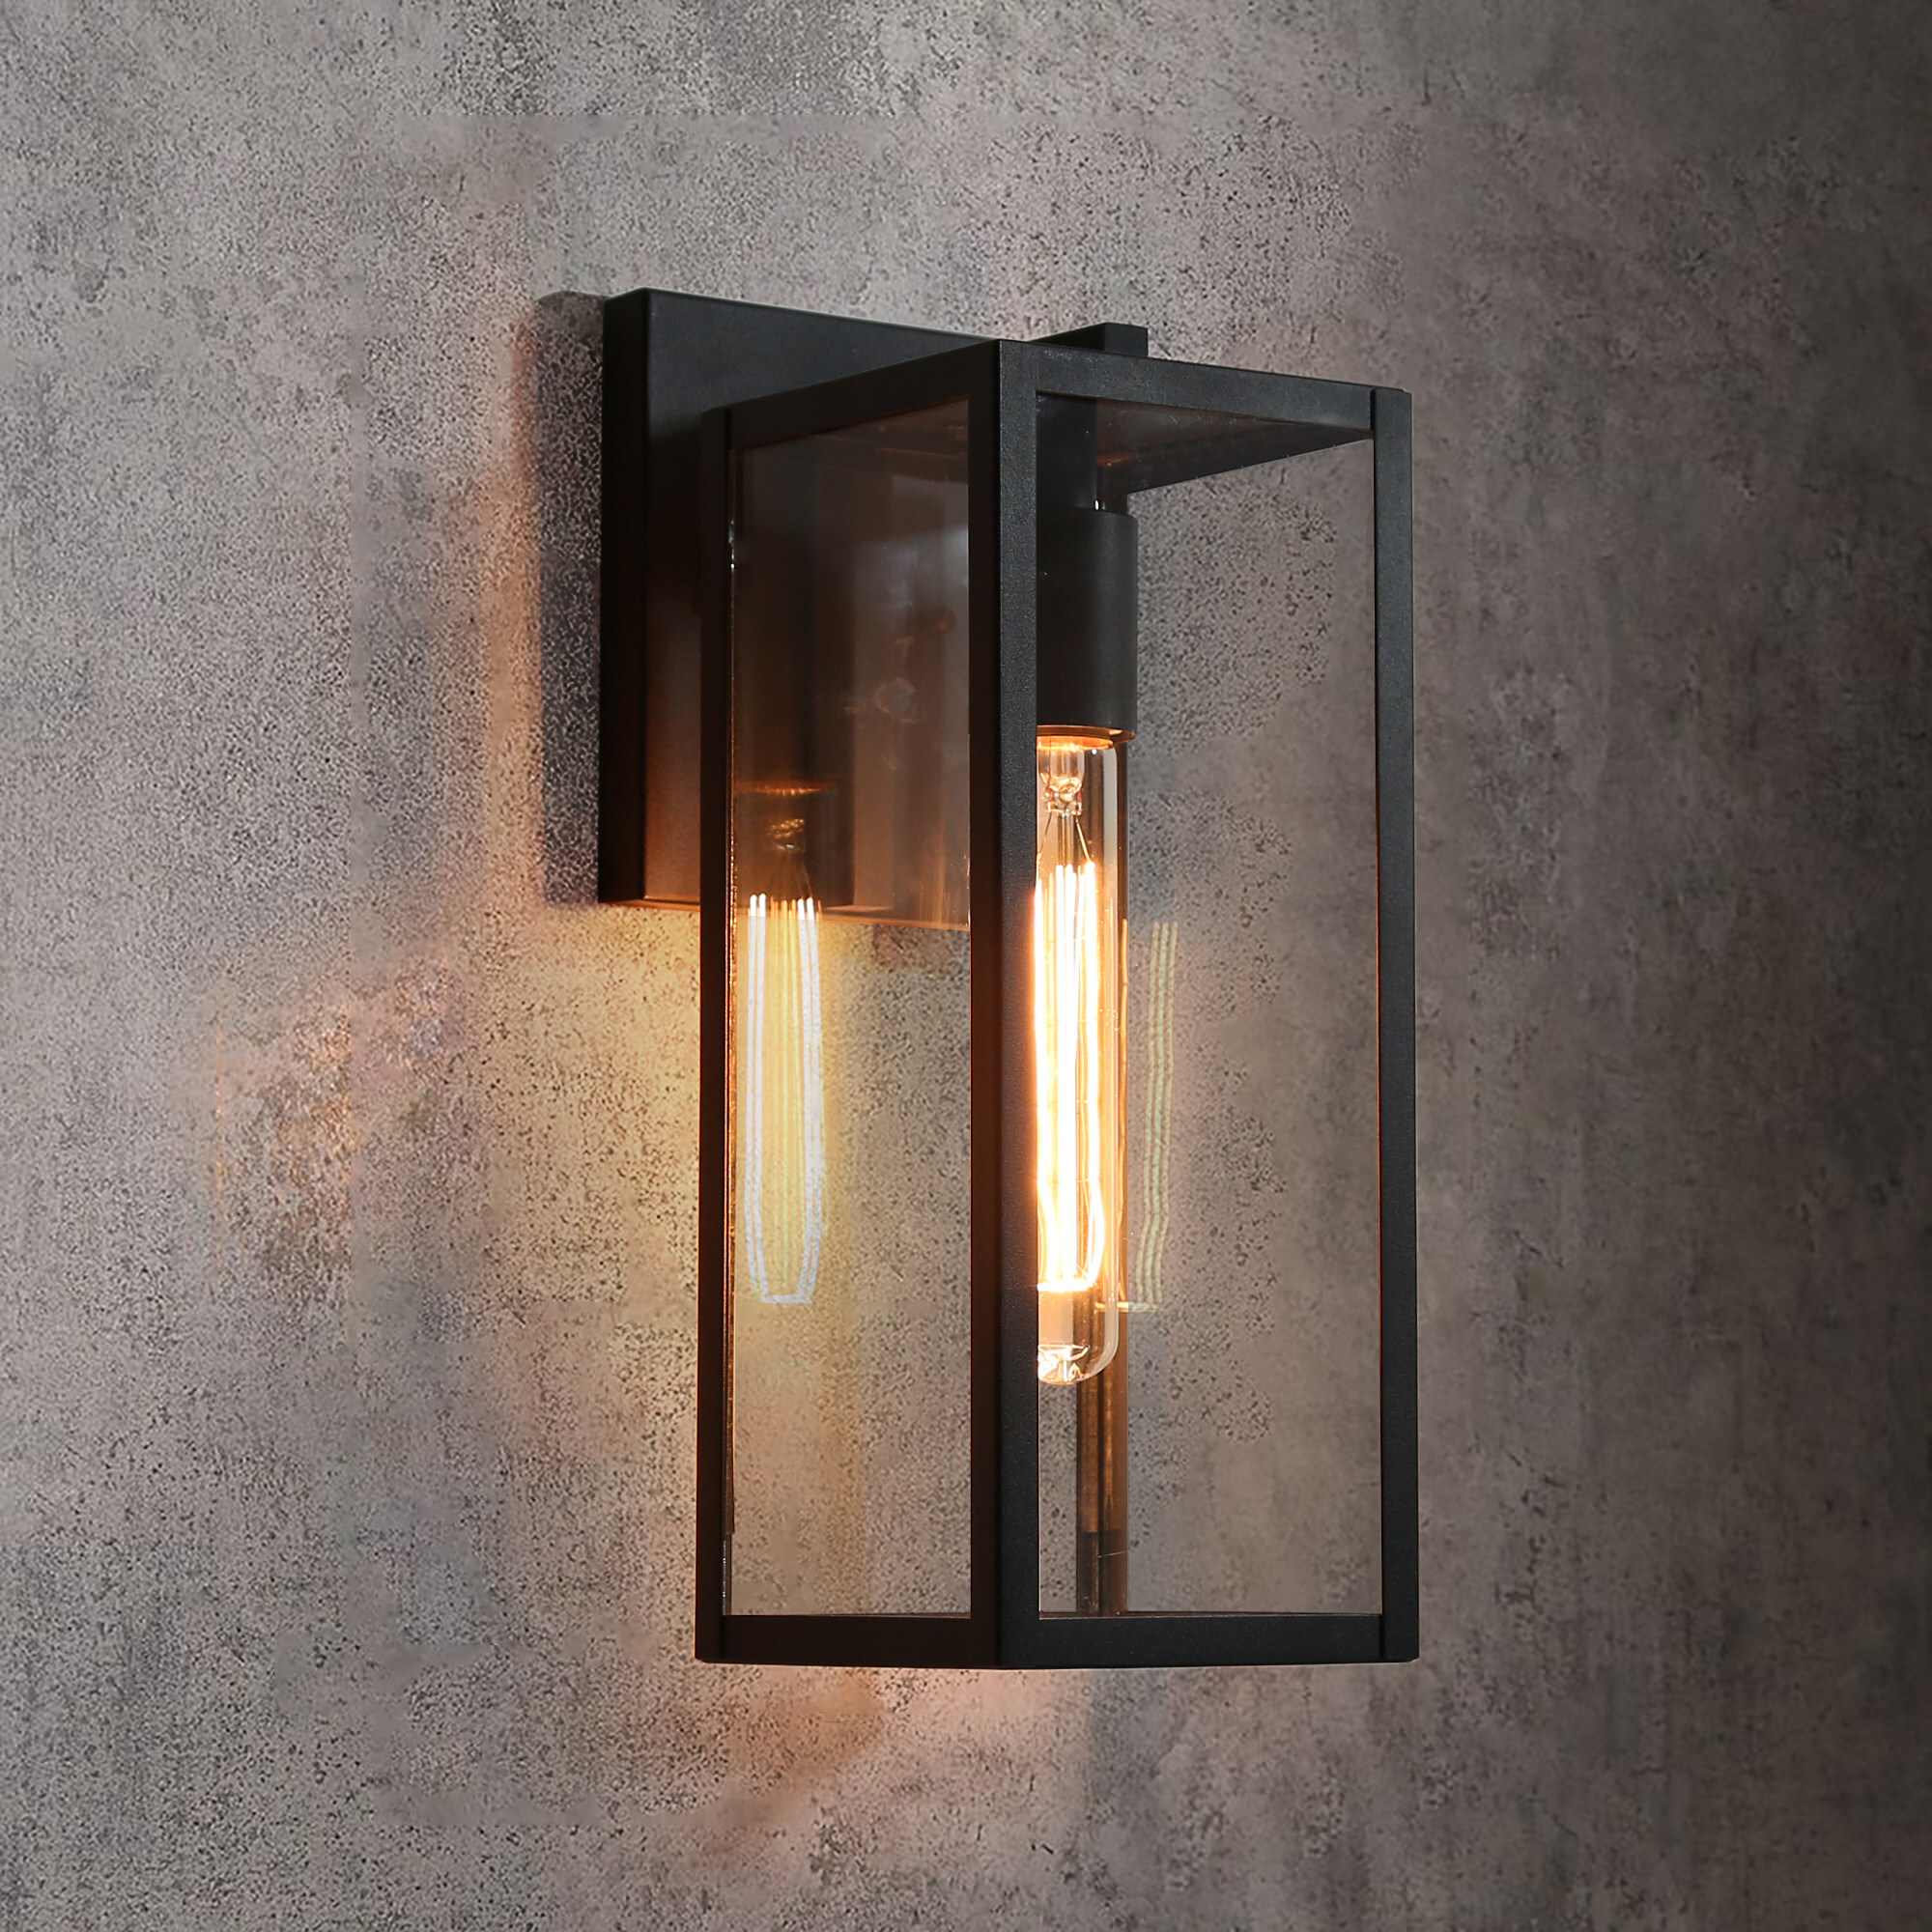 LNC 1-Light Black Modern Farmhouse Outdoor Wall Sconce/Waterproof Exterior Wall Sconce/Vintage Outdoor Lighting Fixture,4.5" L x 14" H x 5" W - image 1 of 13